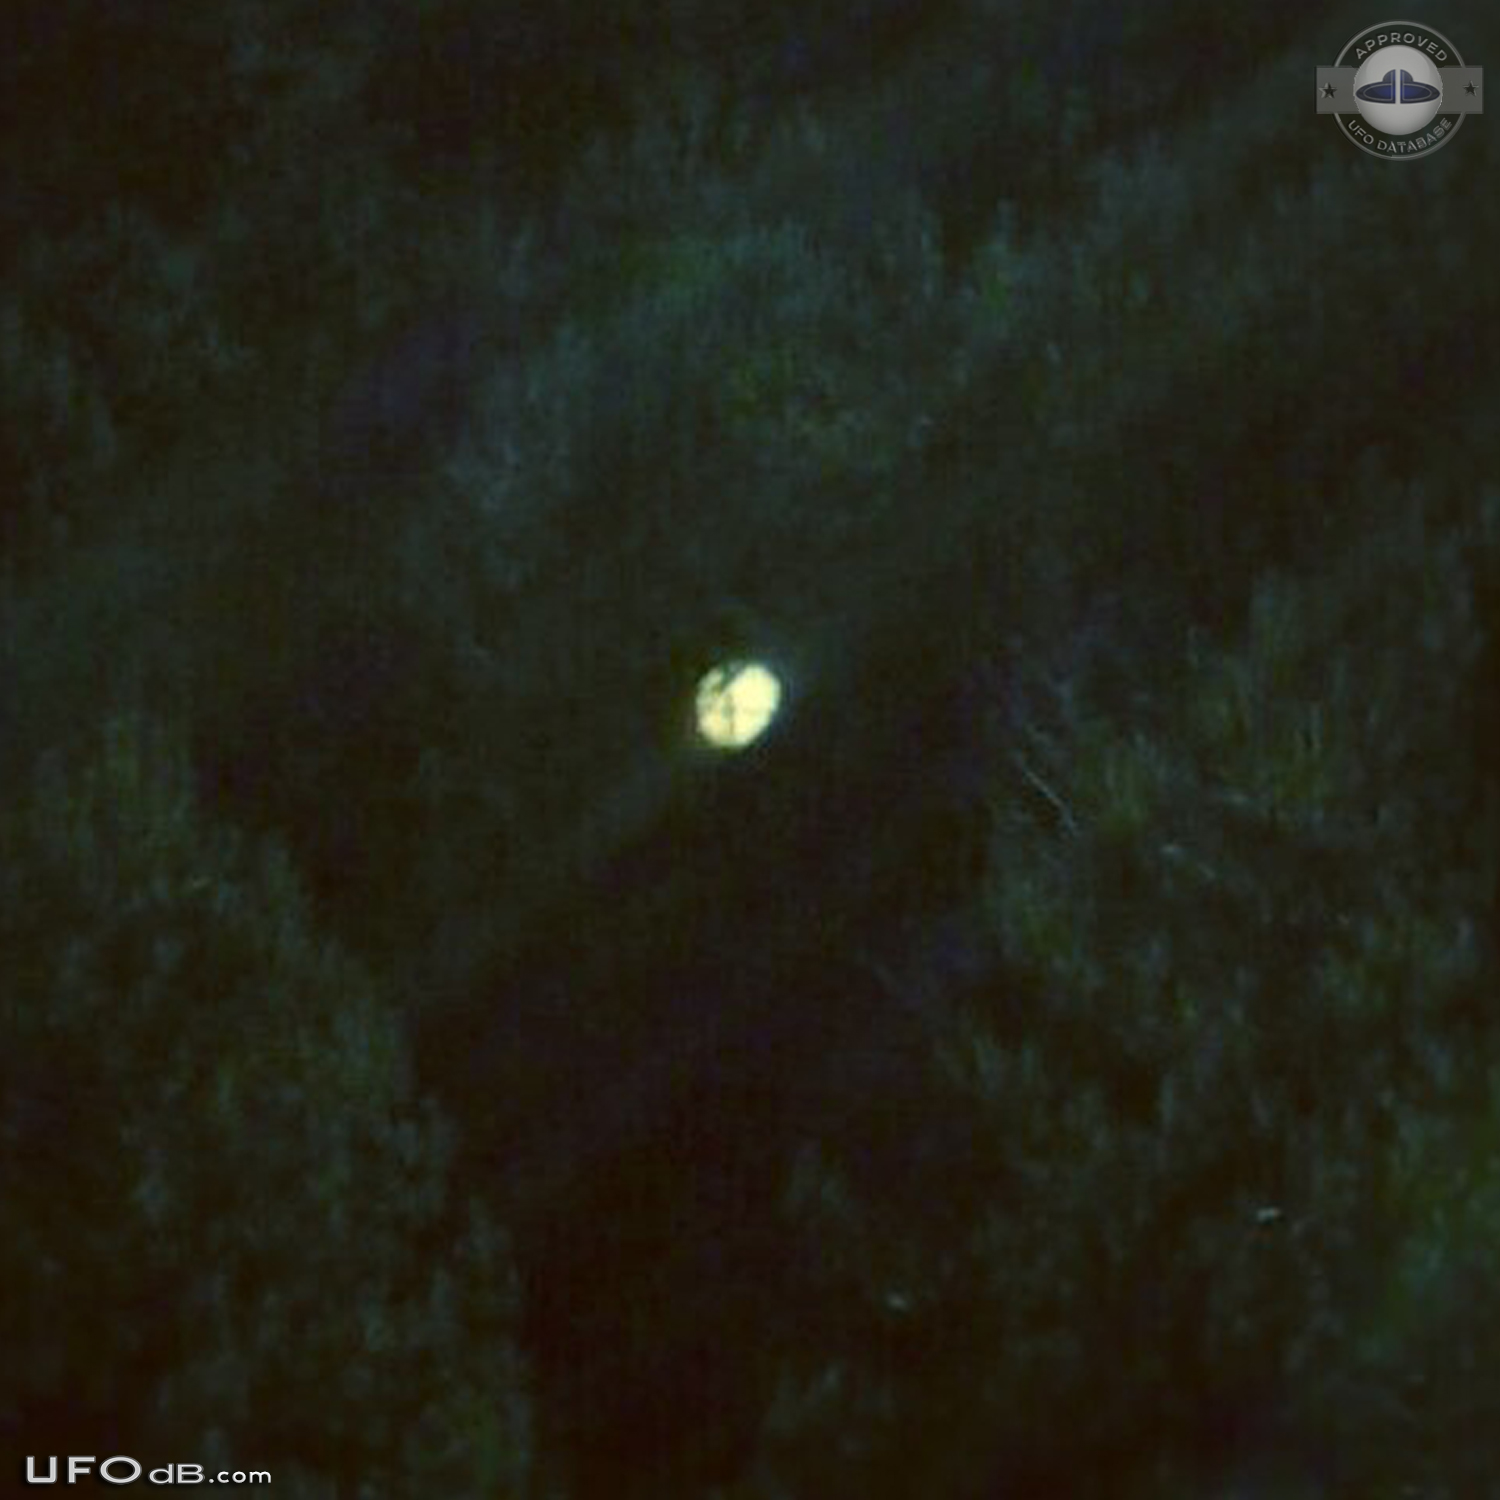 Silent Gold Disc UFO caught on picture - Rhenen, the Netherlands 2014 UFO Picture #572-2